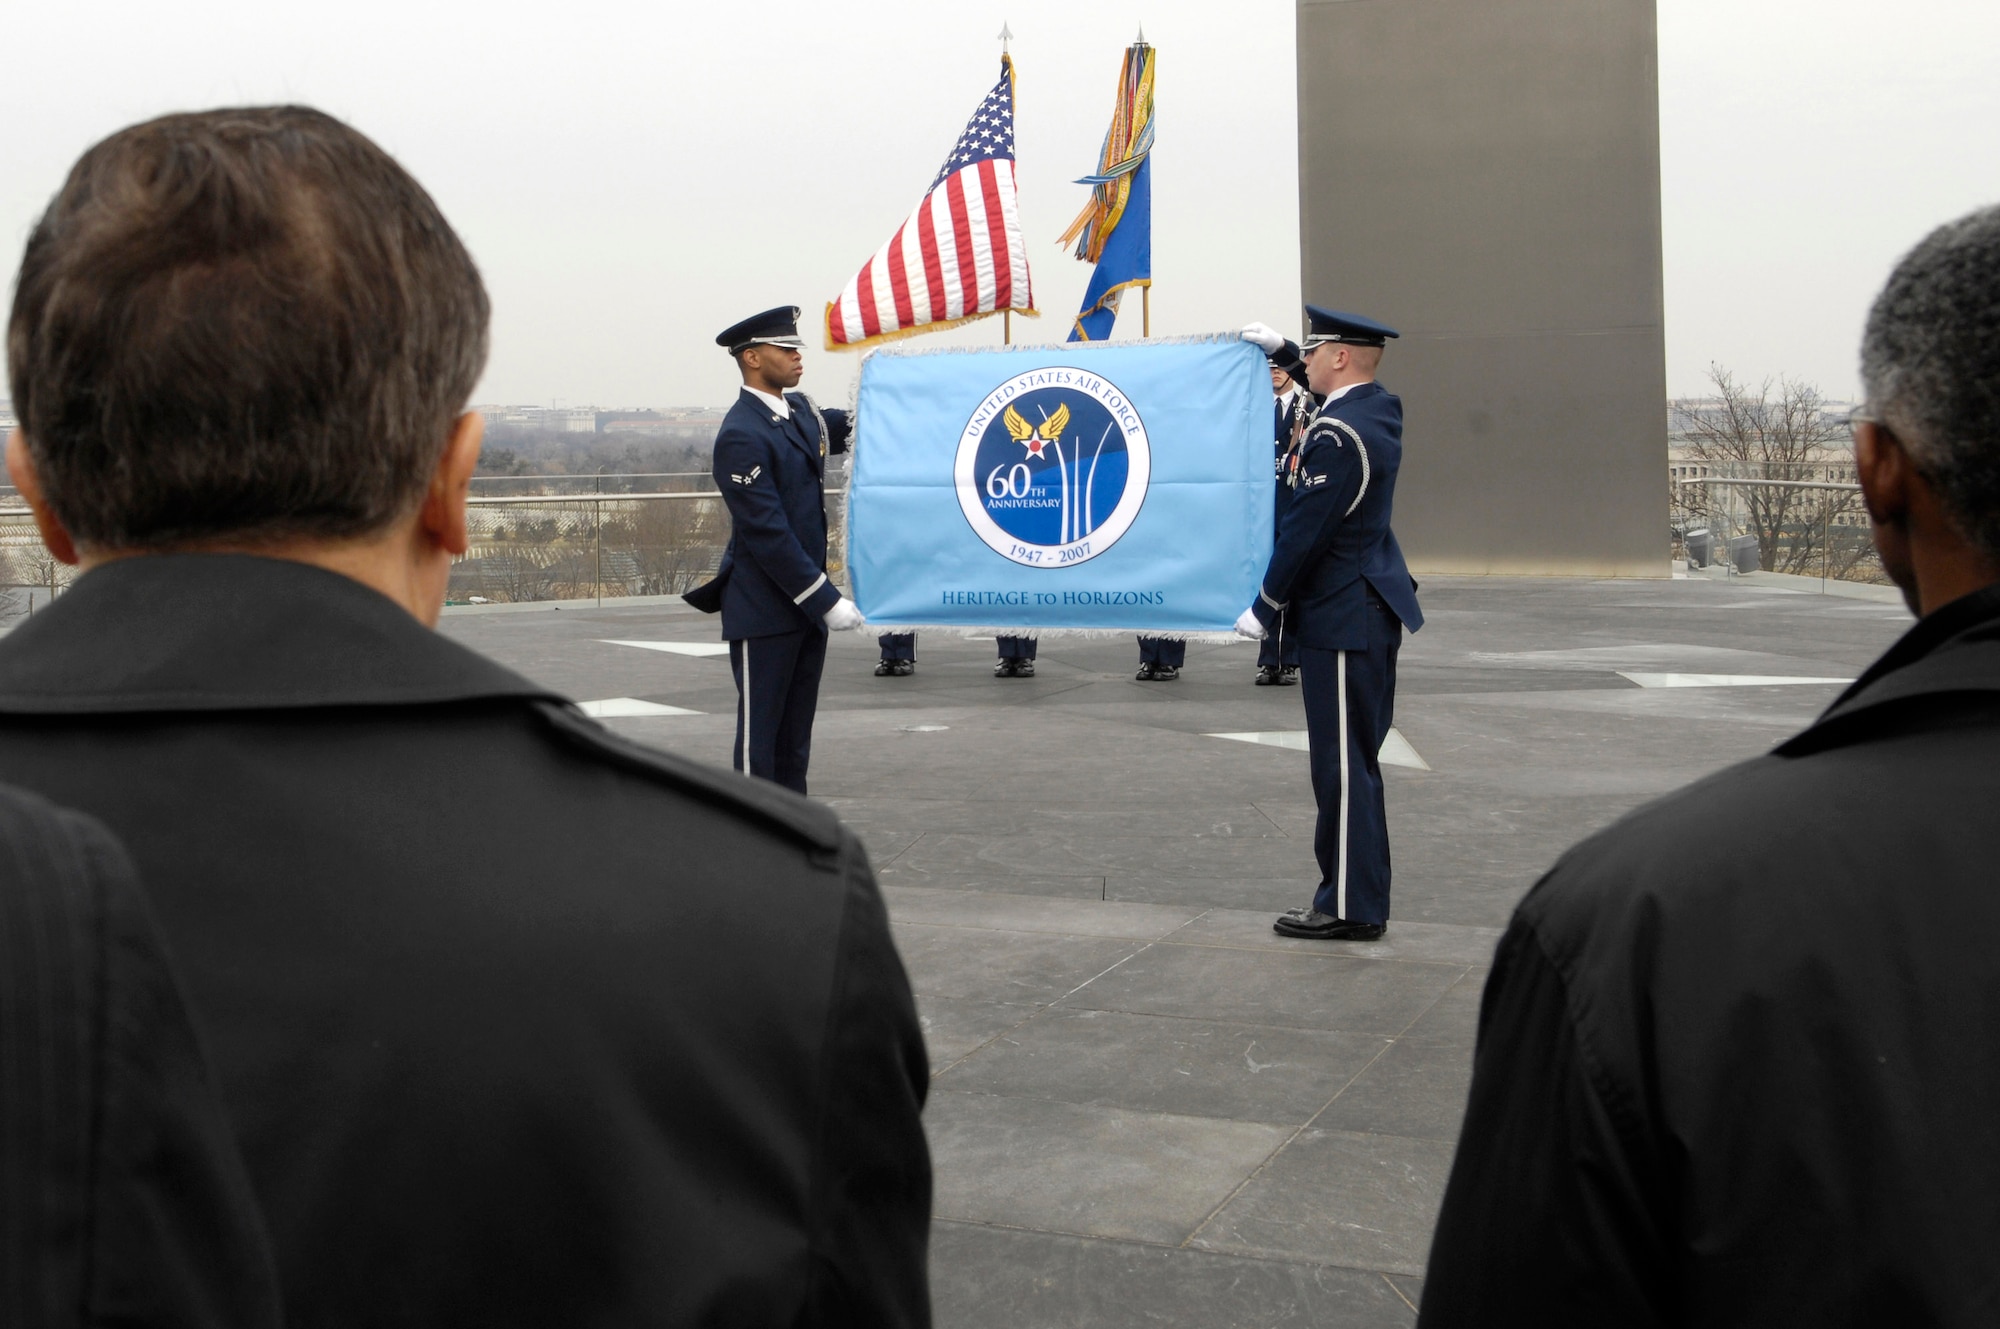 Members of the U.S. Air Force Honor Guard display the Air Force's 60th Aniversary flag during a ceremony at the Air Force Memorial March 1 in Arlington, Va.  The flag will fly at the memorial until the service's 60th birthday Sept. 18. (U.S. Air Force Photo/Senior Airman Daniel R. DeCook)